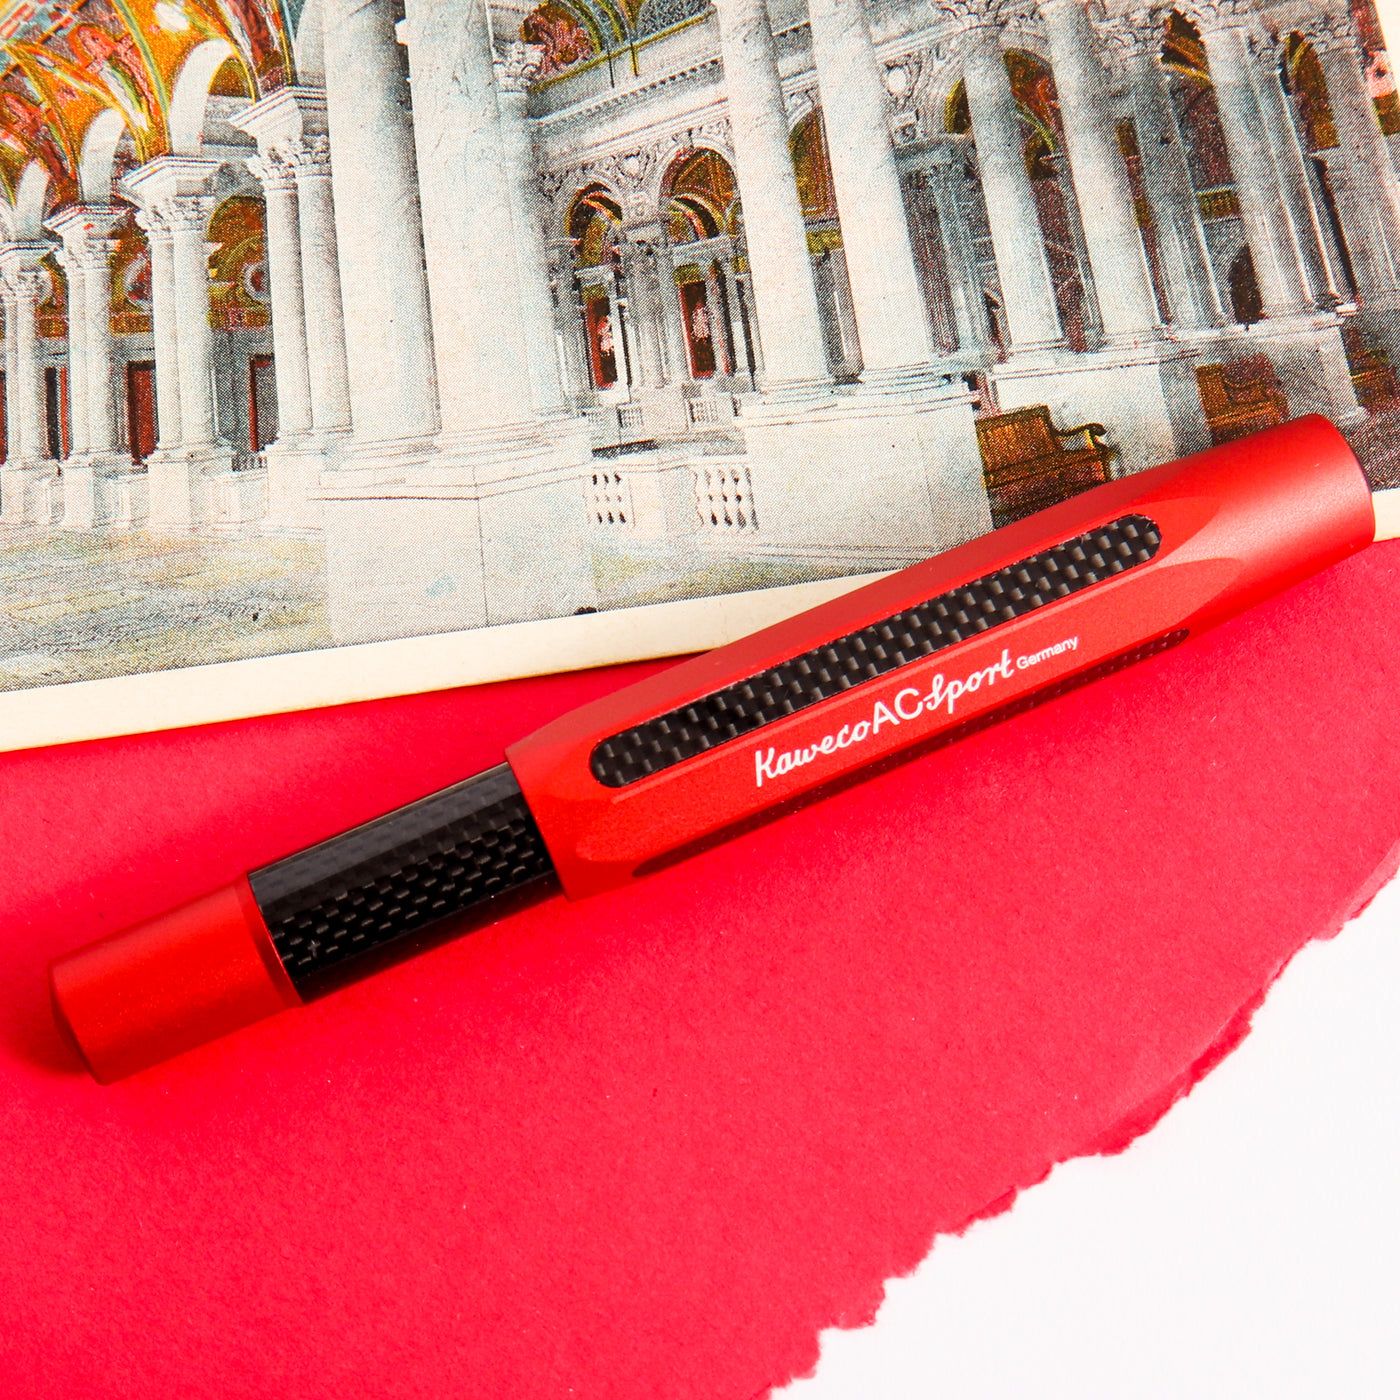 Kaweco AC Sport Red Fountain Pen Capped